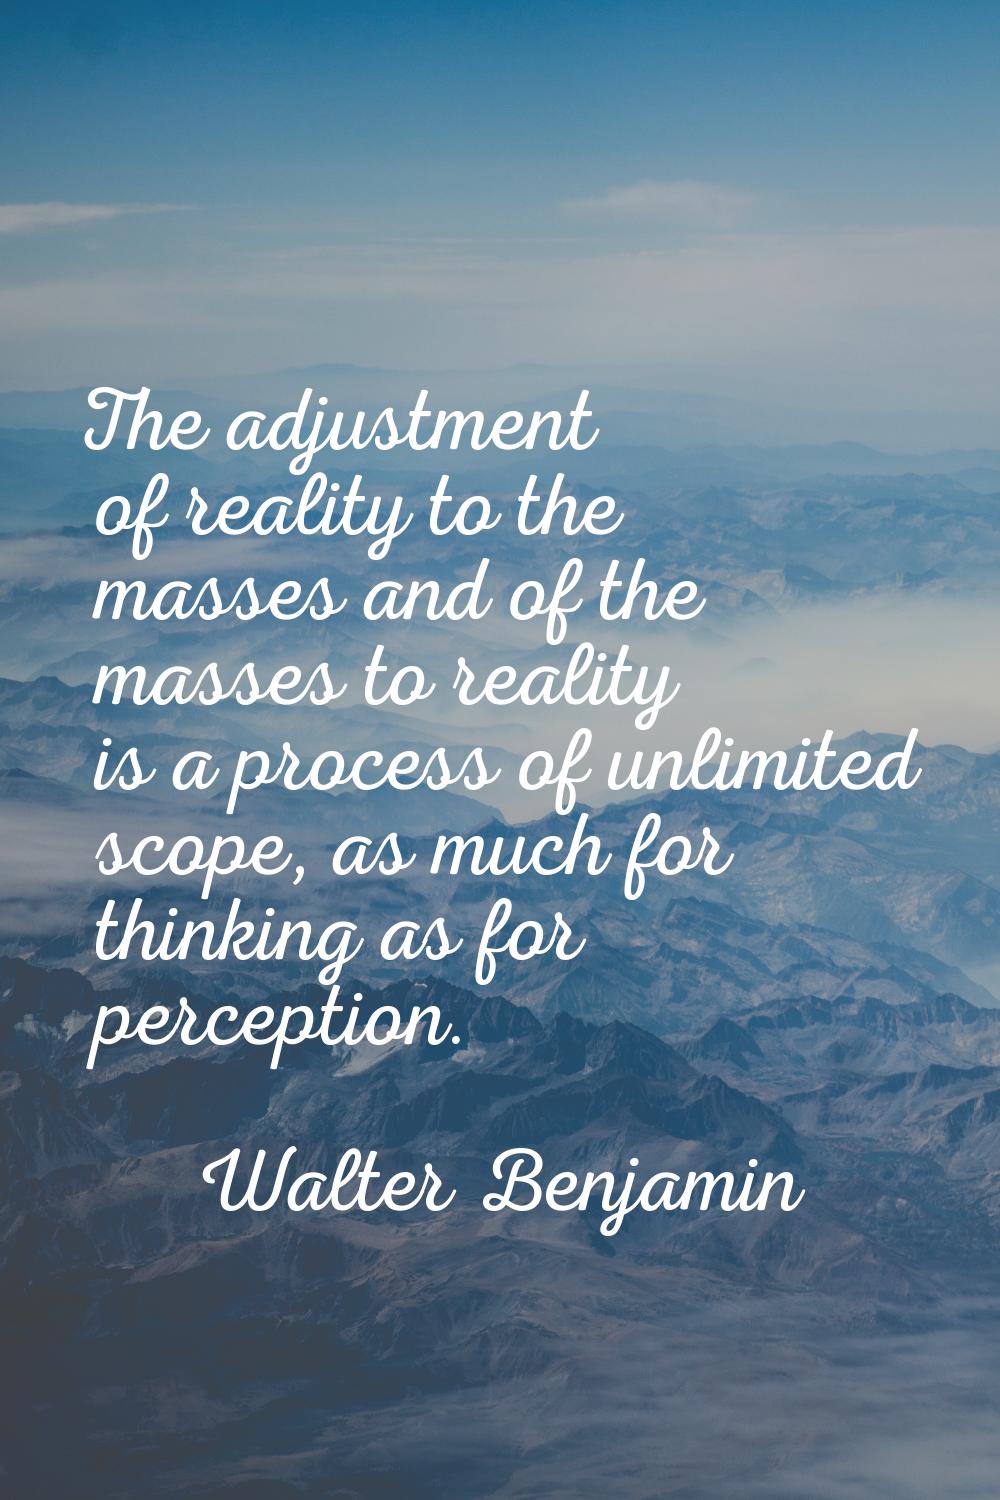 The adjustment of reality to the masses and of the masses to reality is a process of unlimited scop